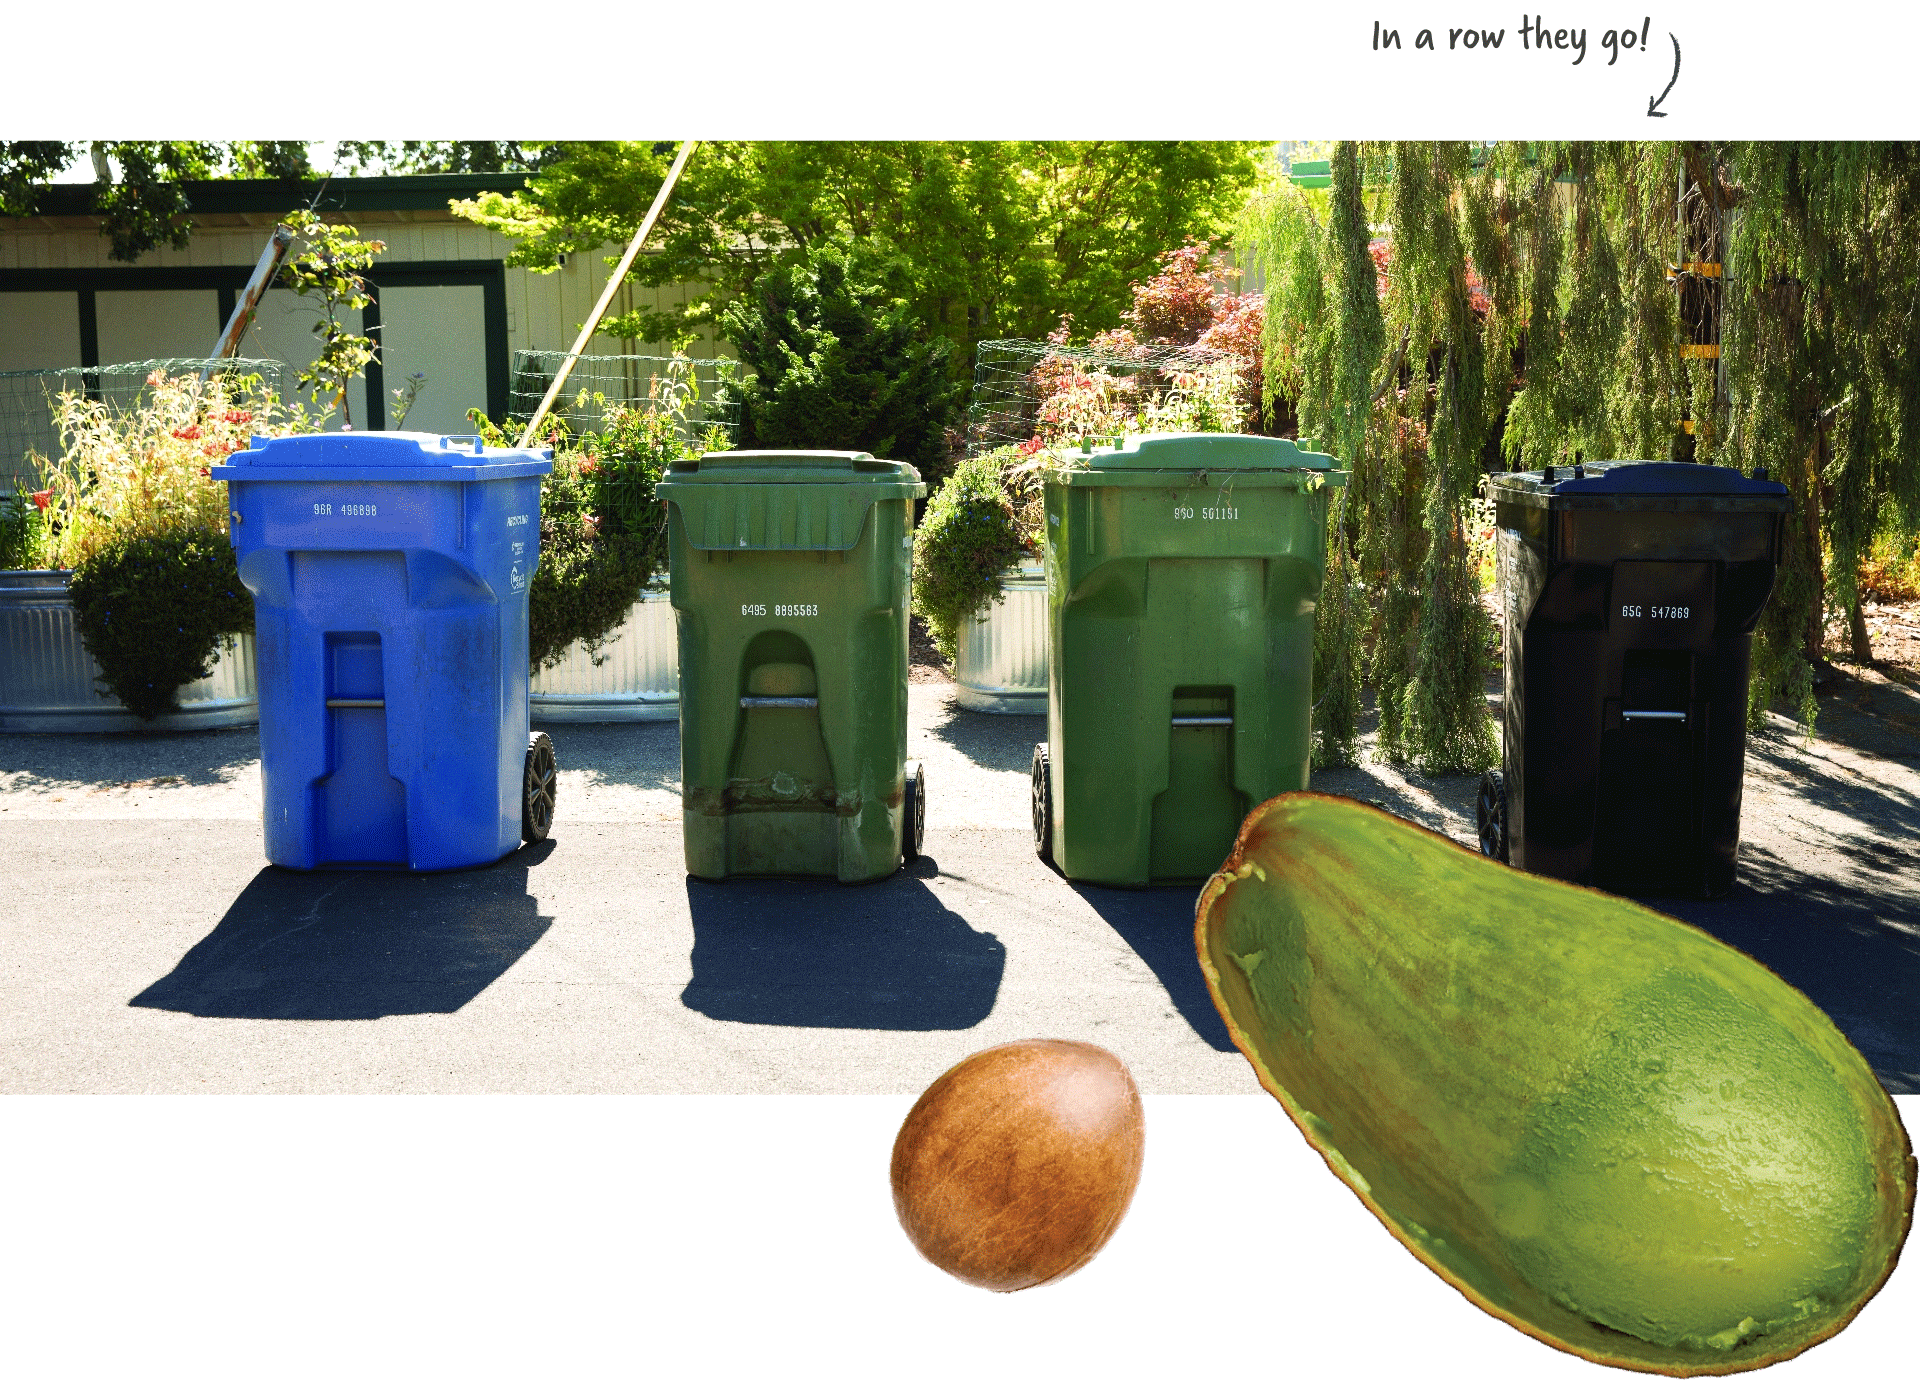 One blue recycling cart, two green compost carts and one black landfill cart in a row in front of a house. An avocado peel and pit overlay the scene.